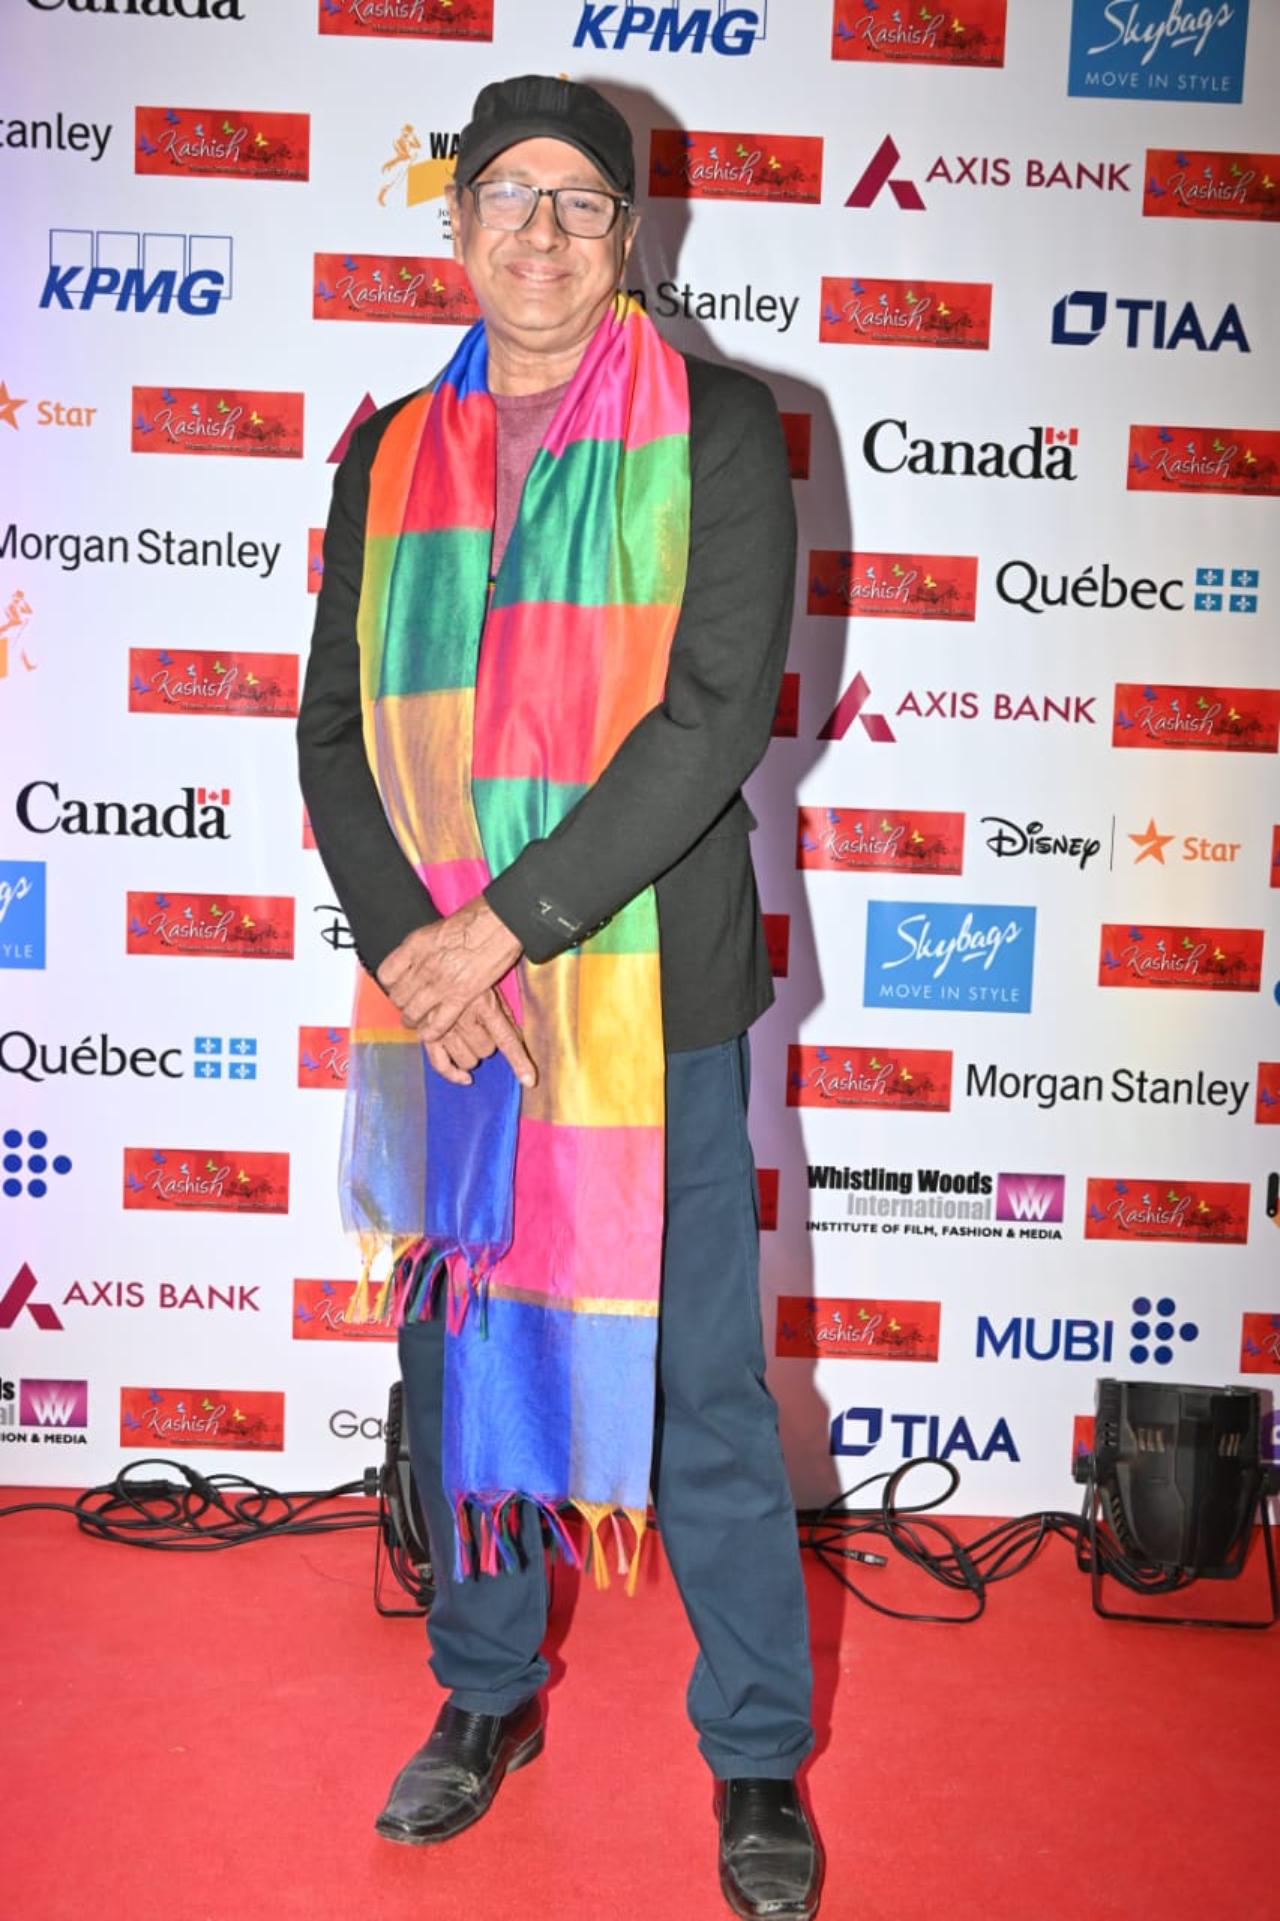 Festival director Sridhar Rangayan was all smiles on the opening night as he welcomed guests